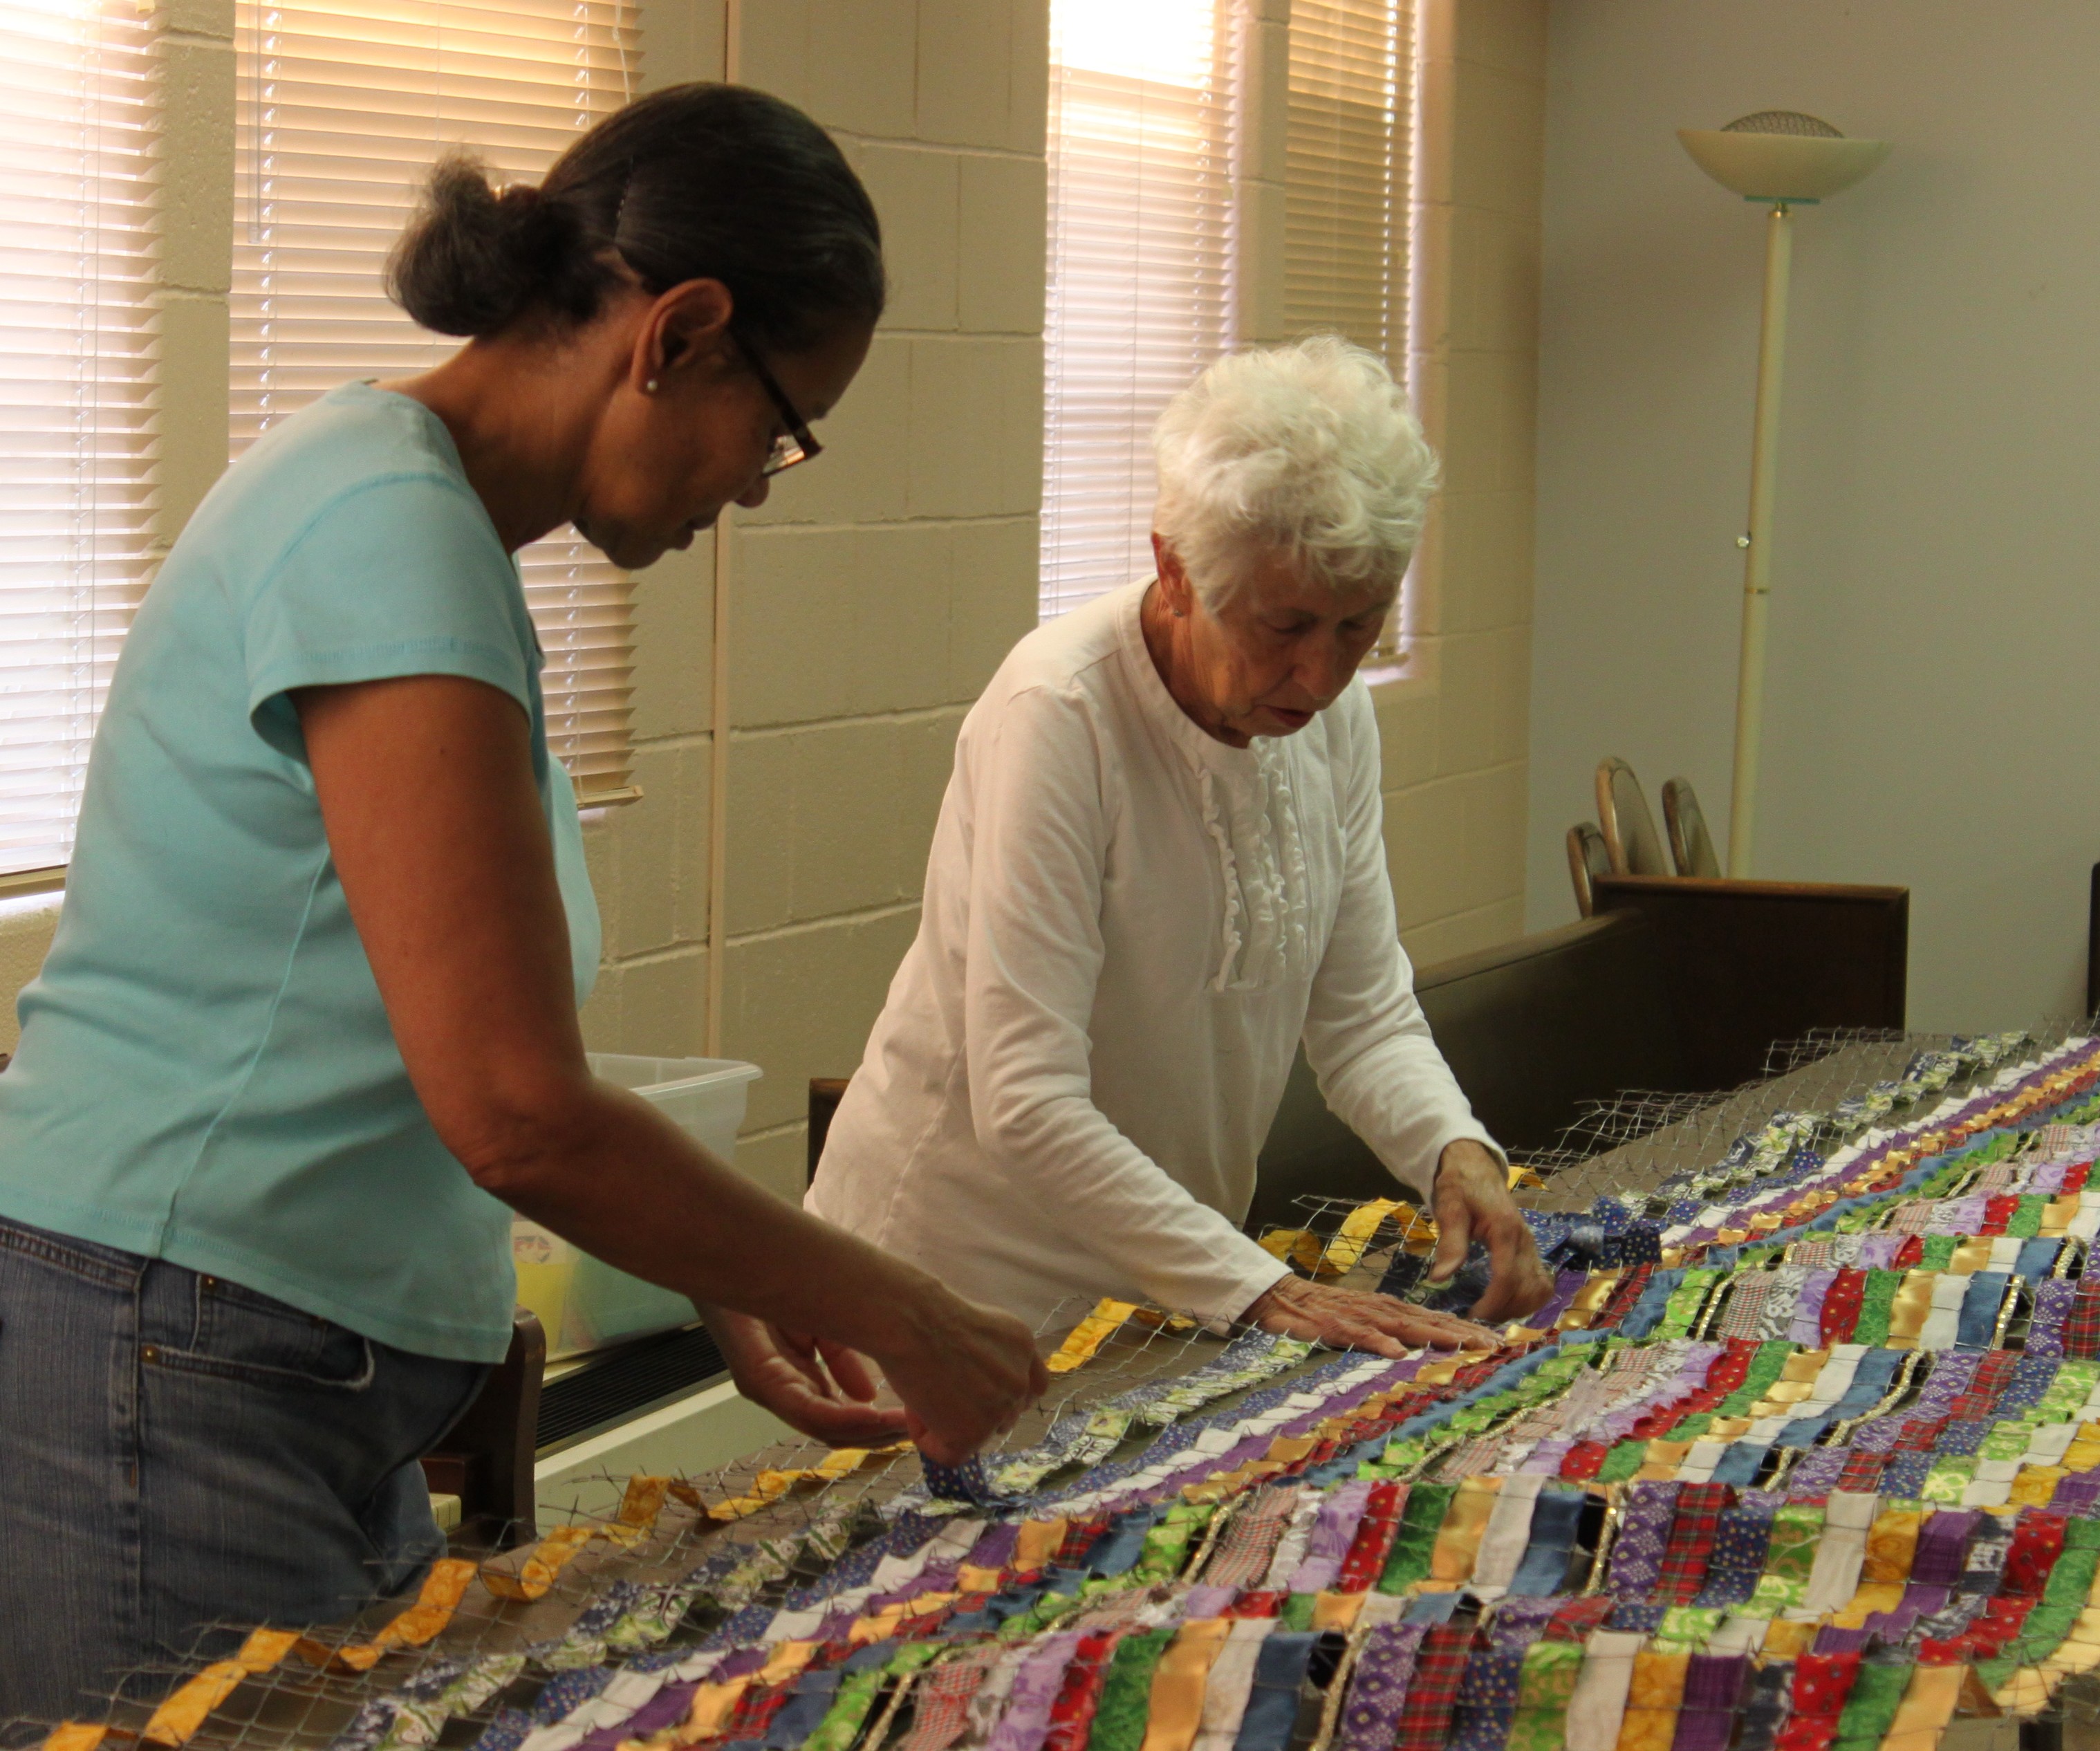 Two women weaving Bound Together. Photo by Linda Henke.